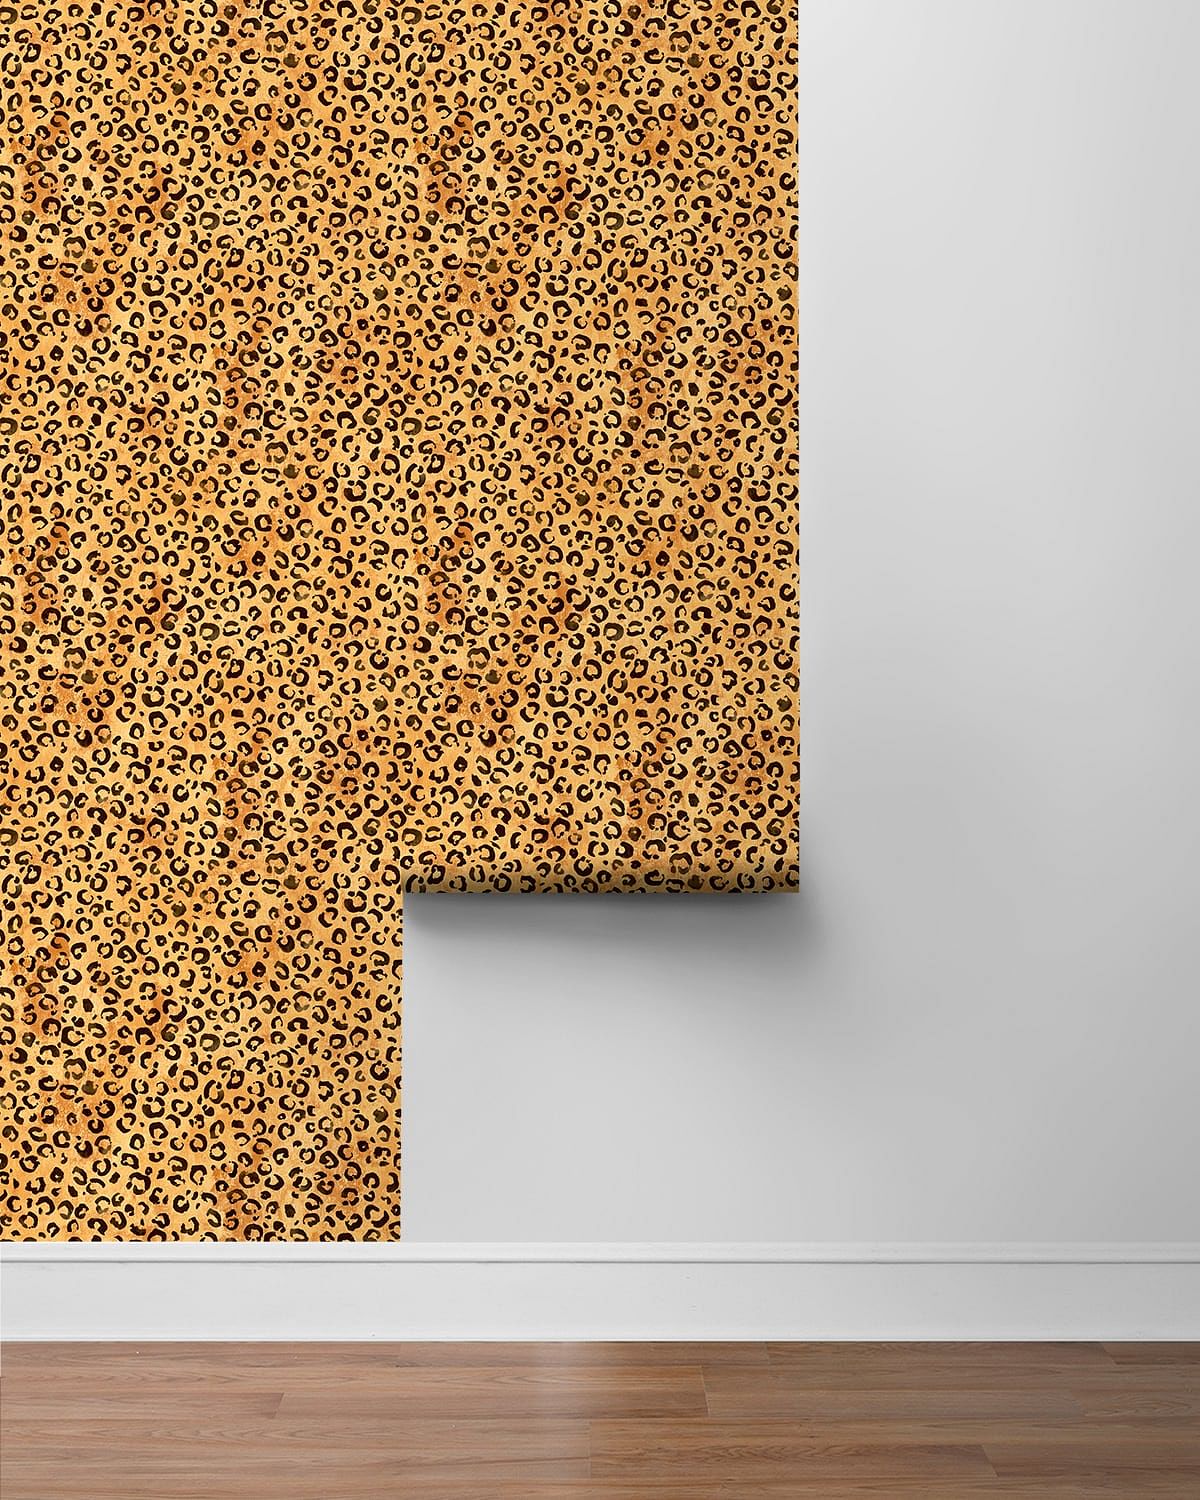 Leopard Print Is My Neutral Removable Peel And Stick Wallpaper – Little  Chickadee Walls